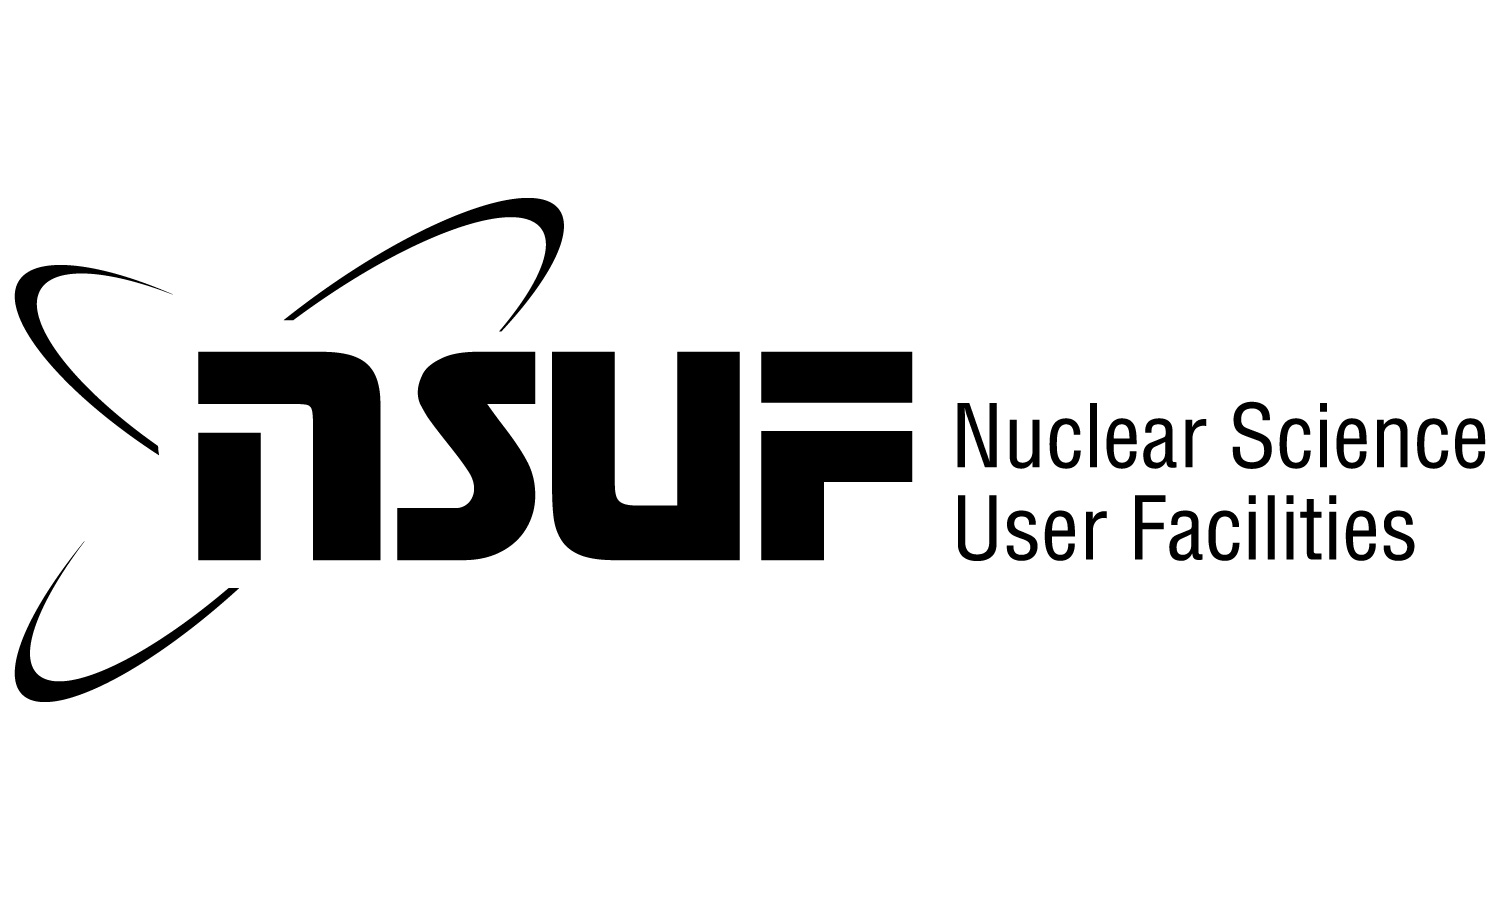 Nuclear Science User Facilities